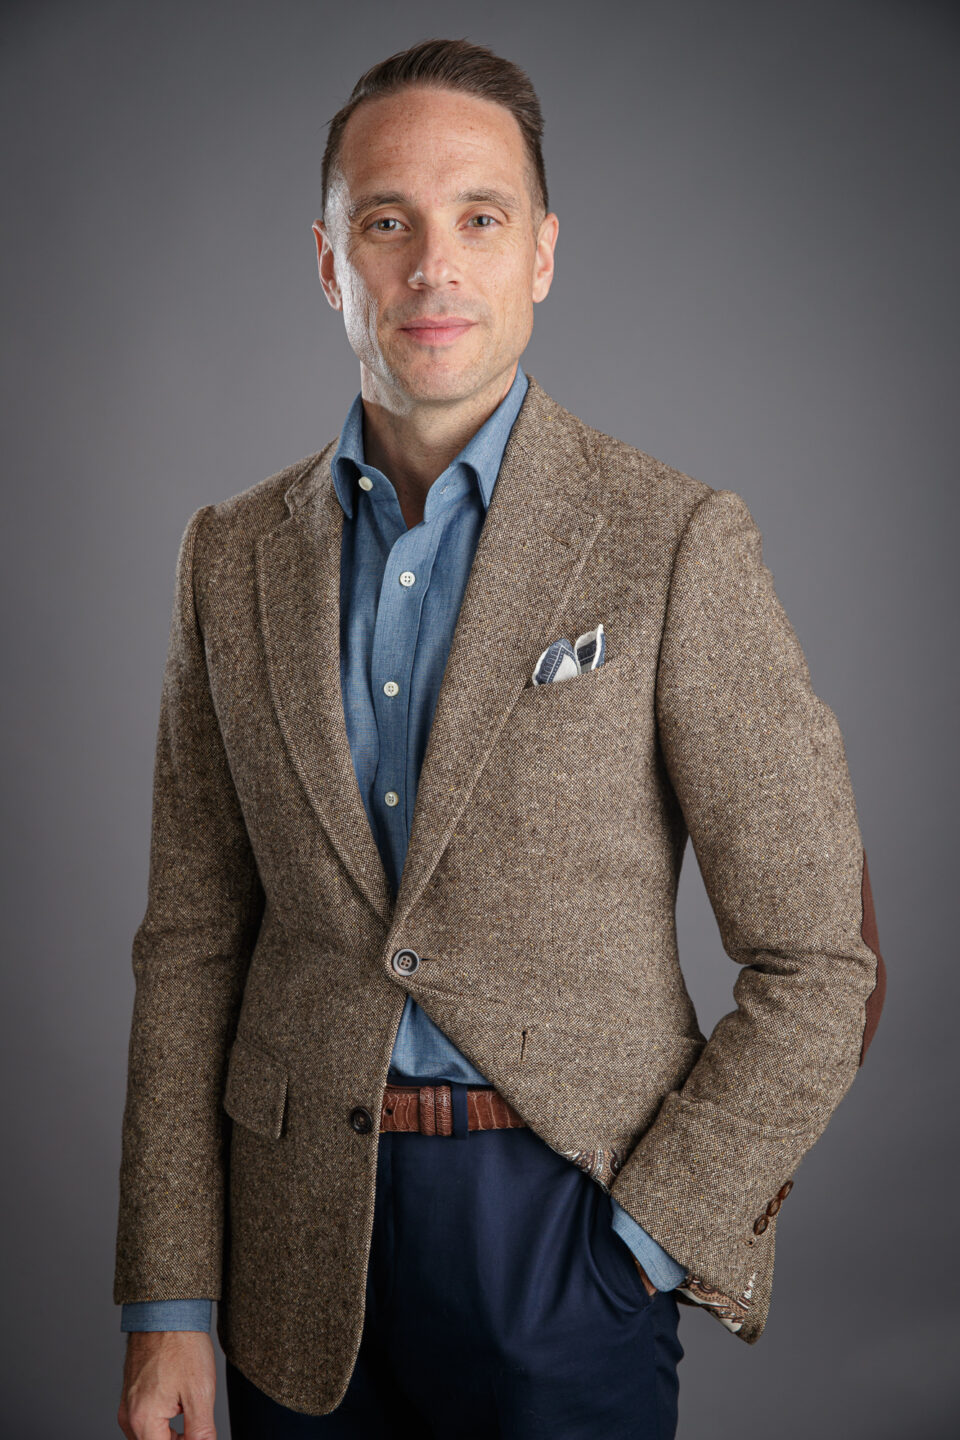 Brown Tweed Sport Coat Outfit Idea With Navy Pants & OCBD